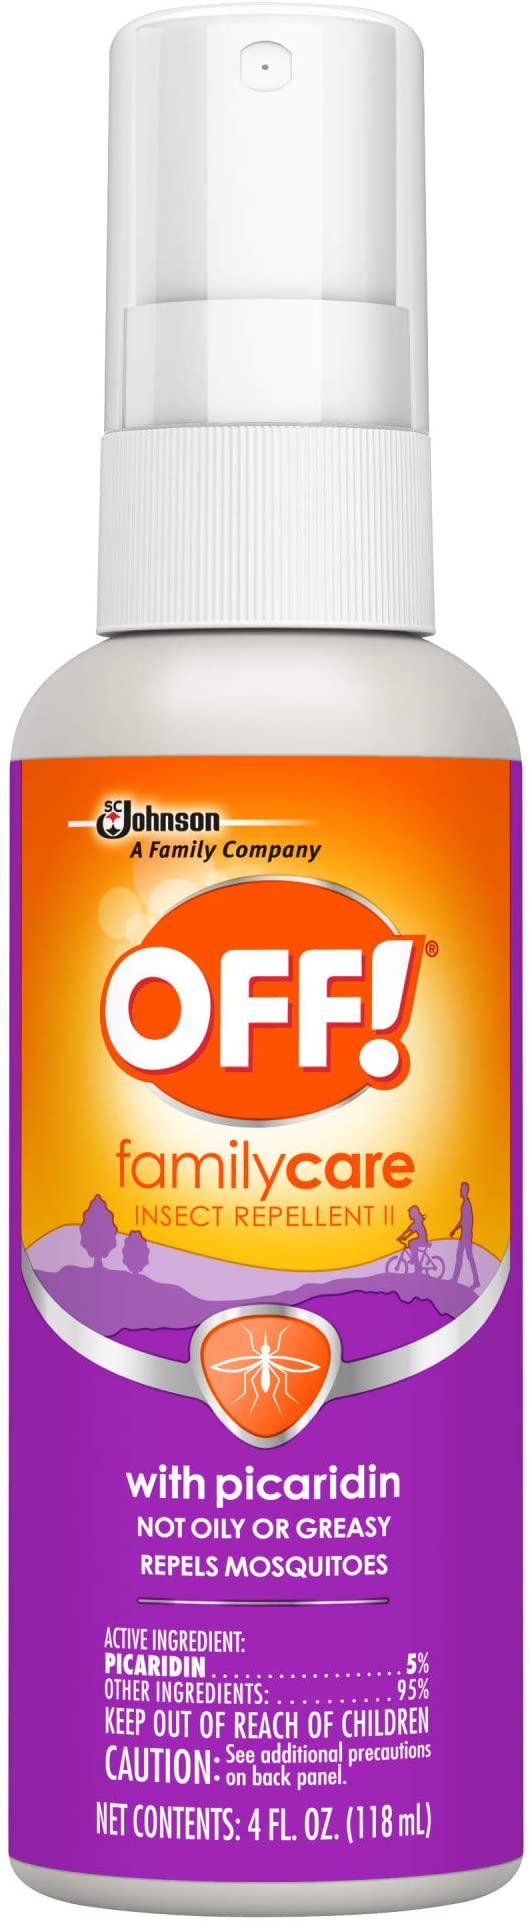 OFF! Family Care Insect & Mosquito Repellent II, Bug Spray with Picaridin, Not Oily or Greasy, 4 oz.